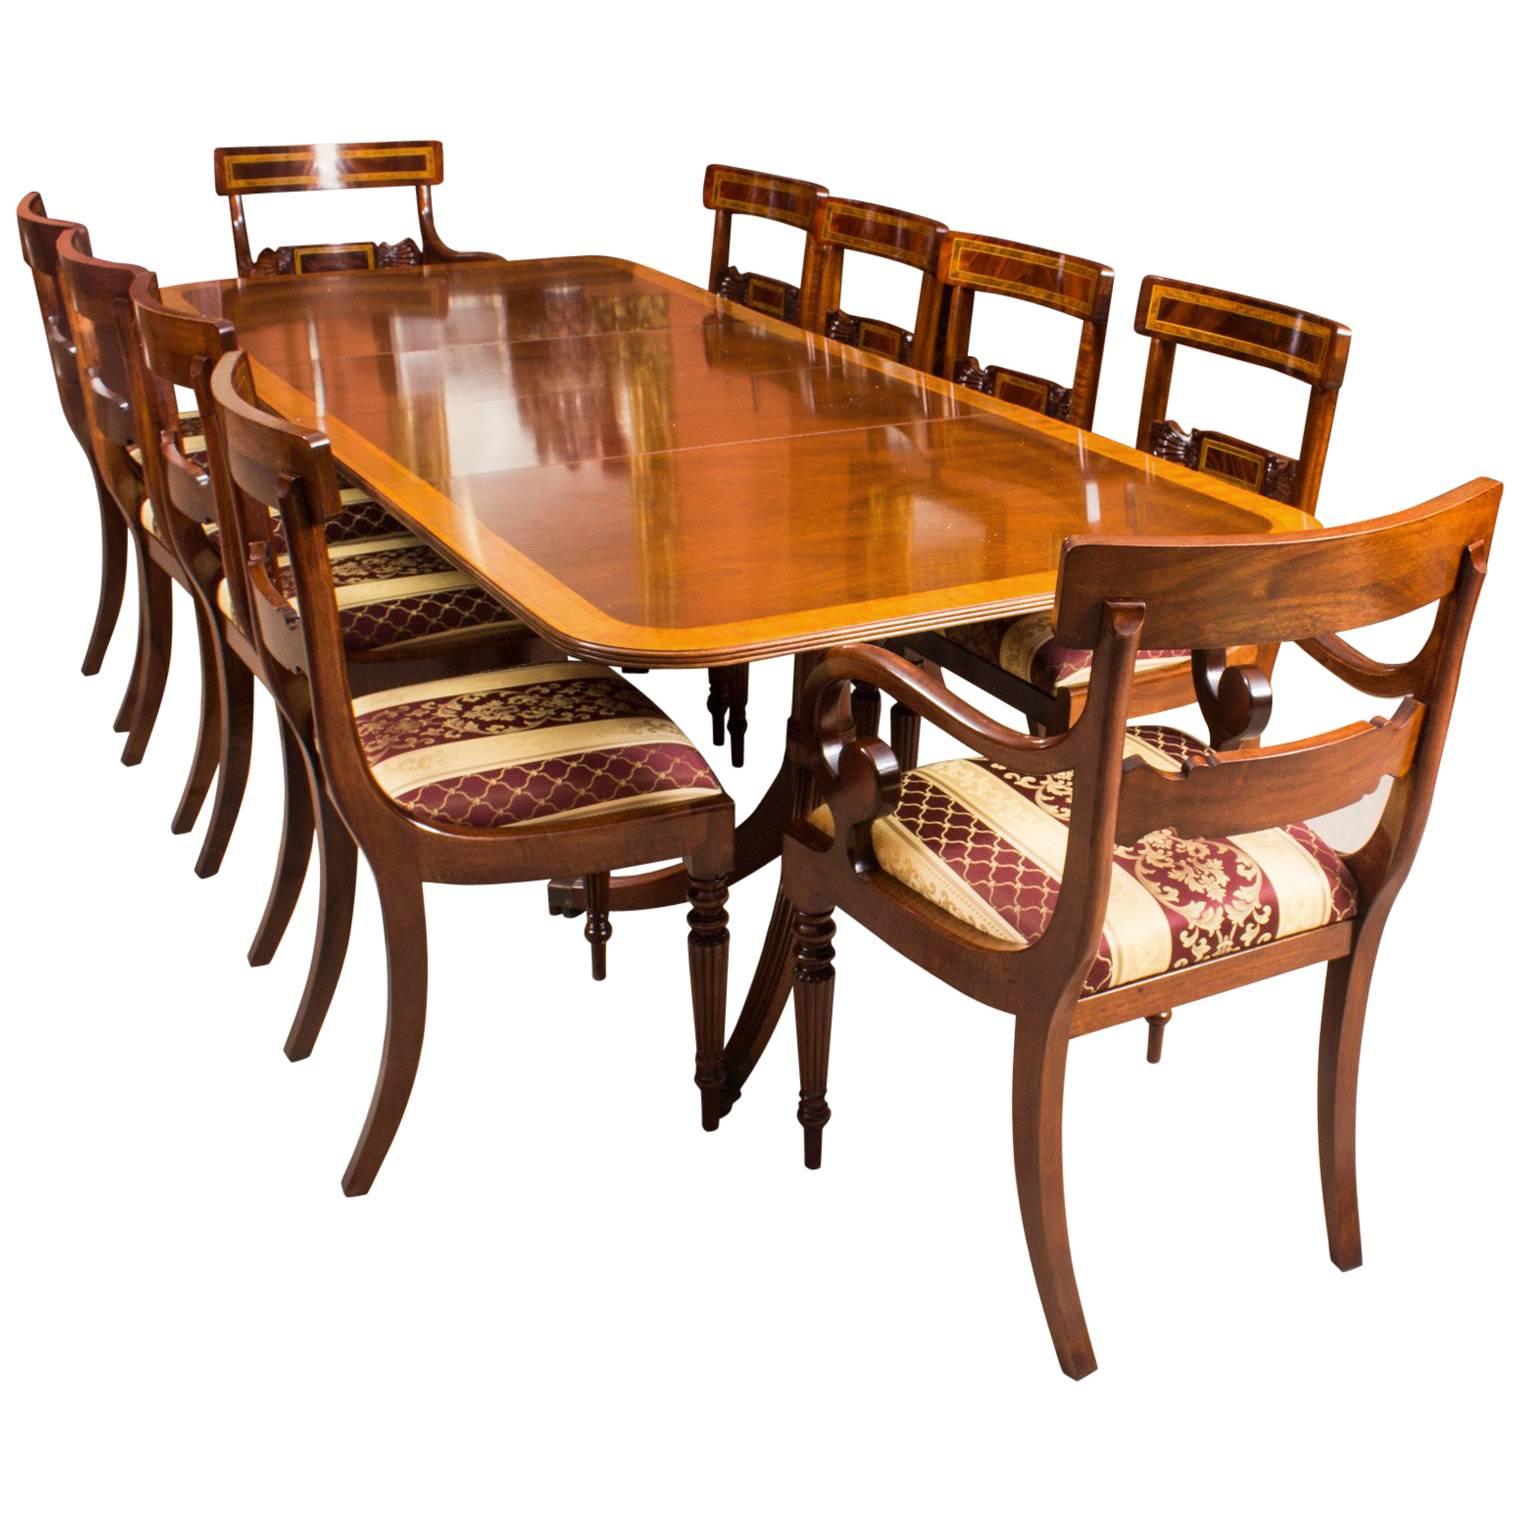 Vintage Dining Table by William Tillman, Harrods and Ten Chairs